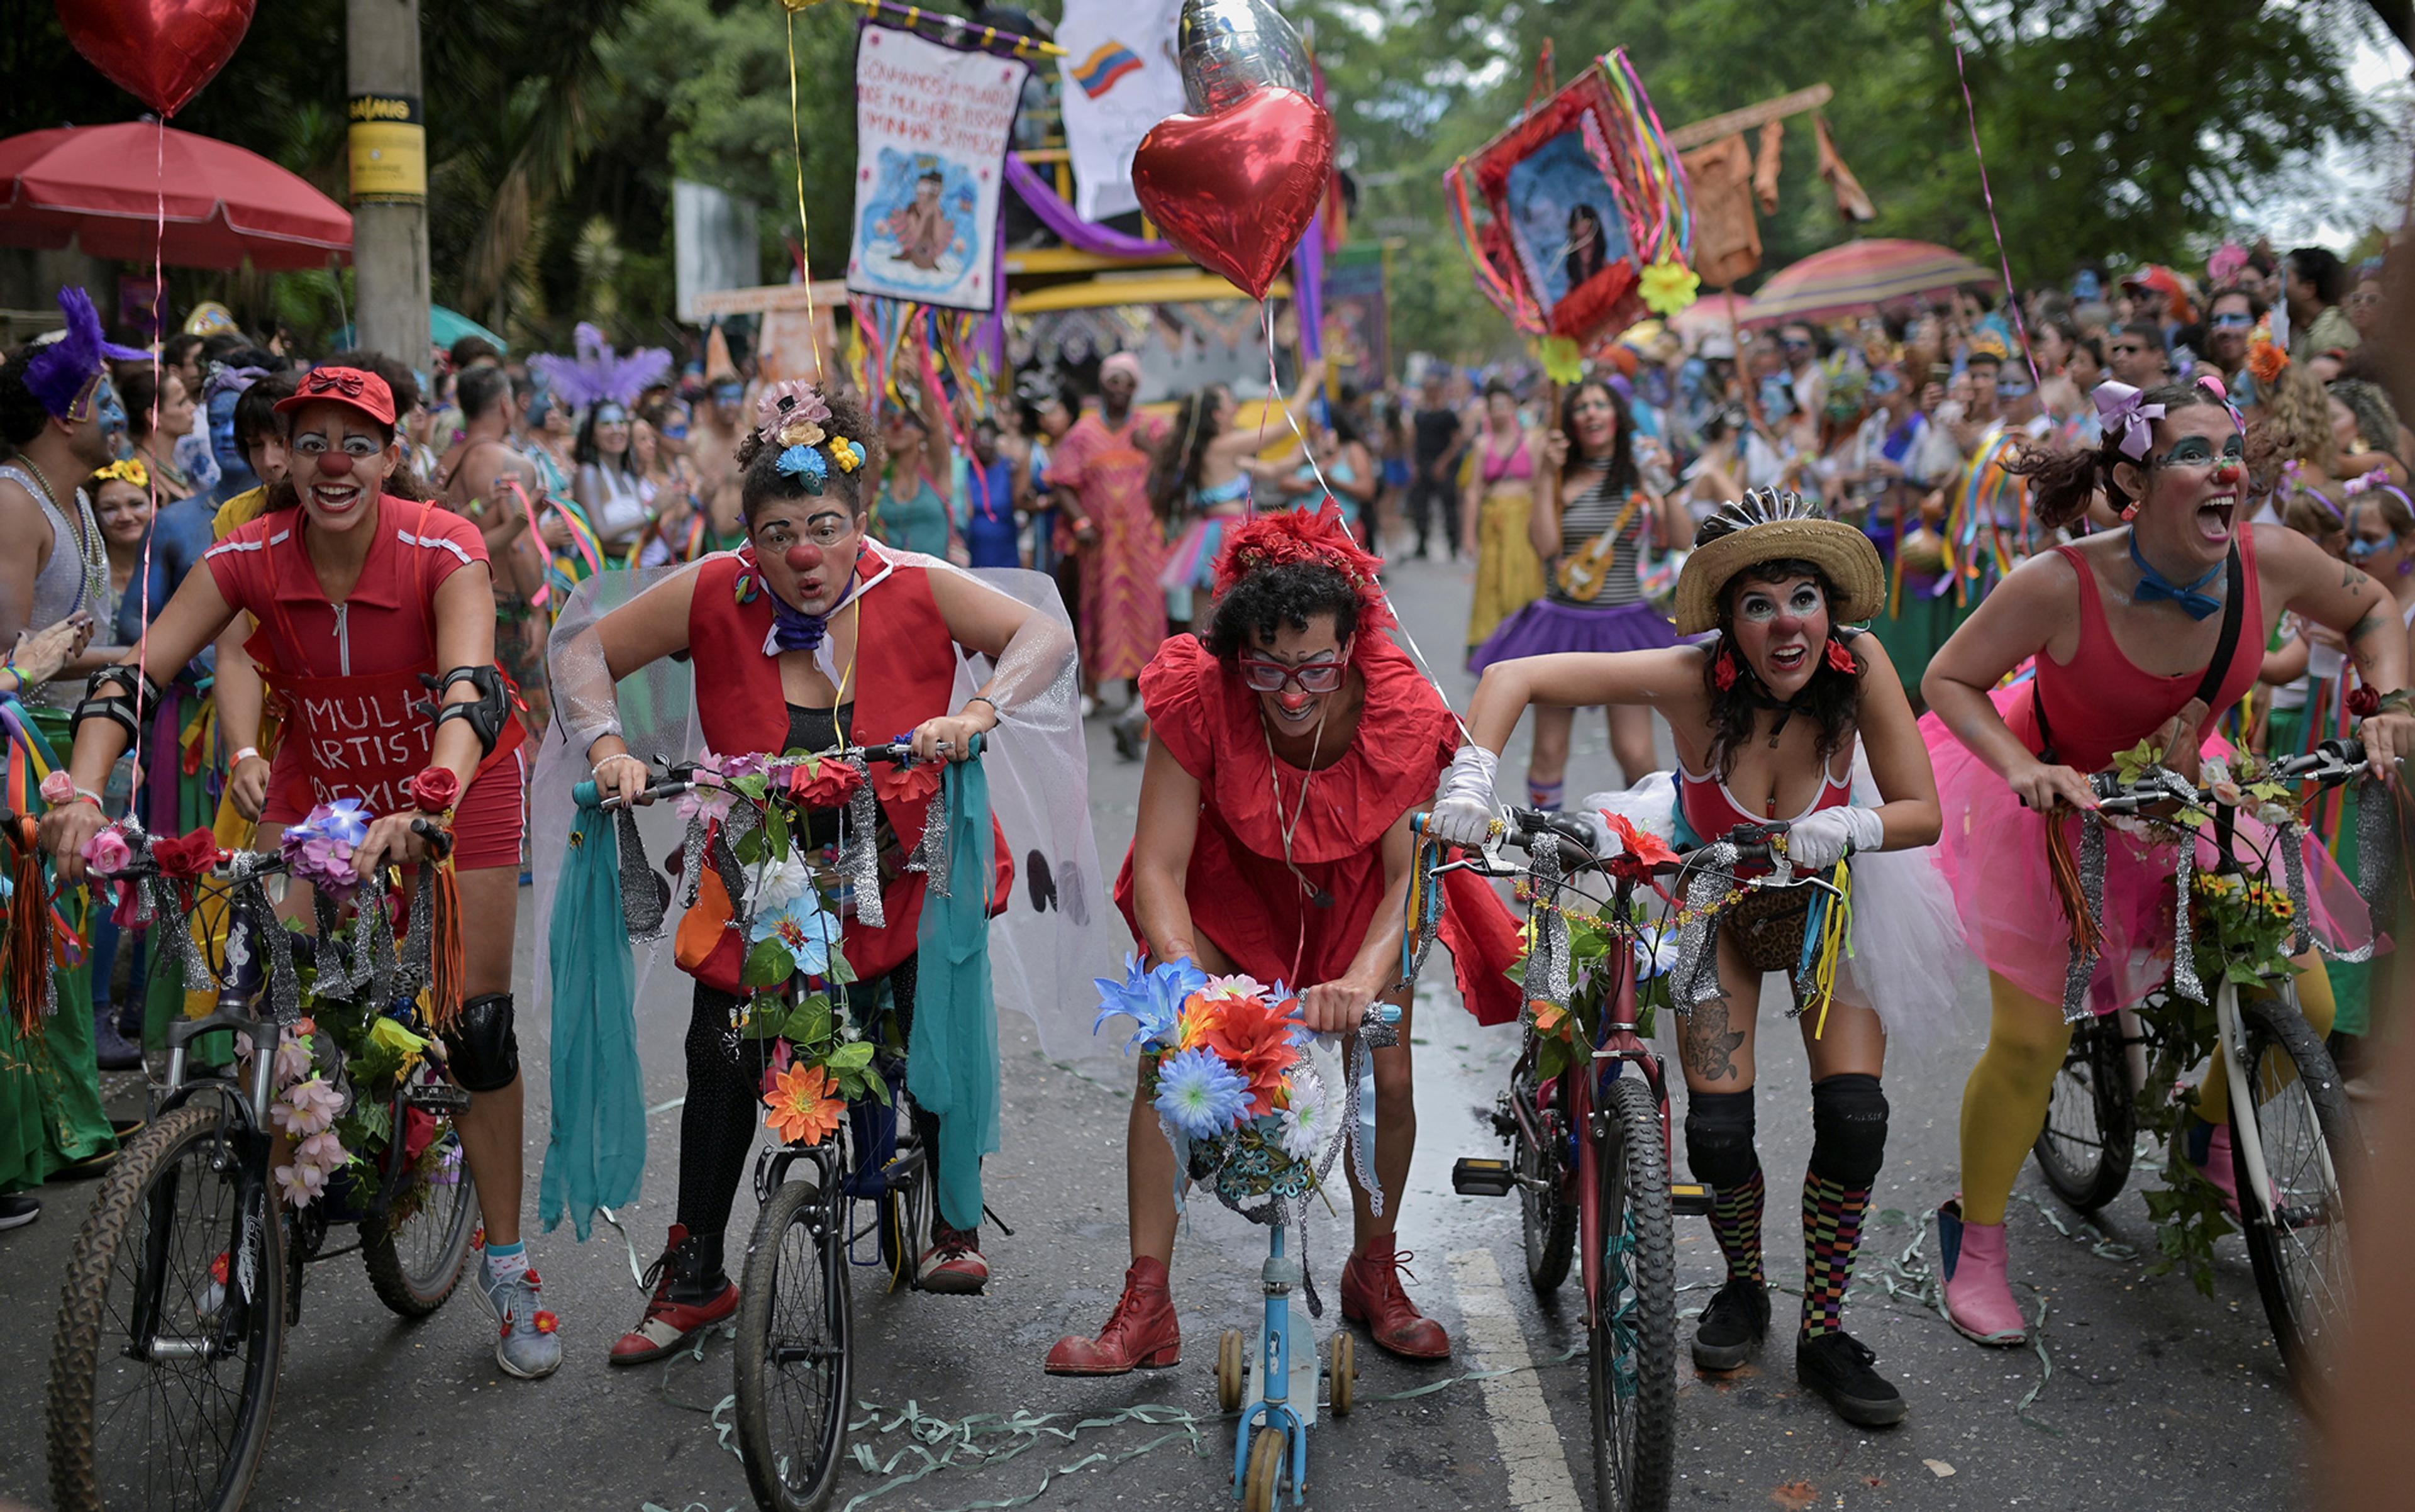 A vibrant parade with people dressed in colourful, clown-like costumes riding decorated bicycles. They are smiling and laughing as they ride through a crowd of onlookers. Various decorations such as flowers, balloons, and banners add to the festive atmosphere. Trees line the background of the street.